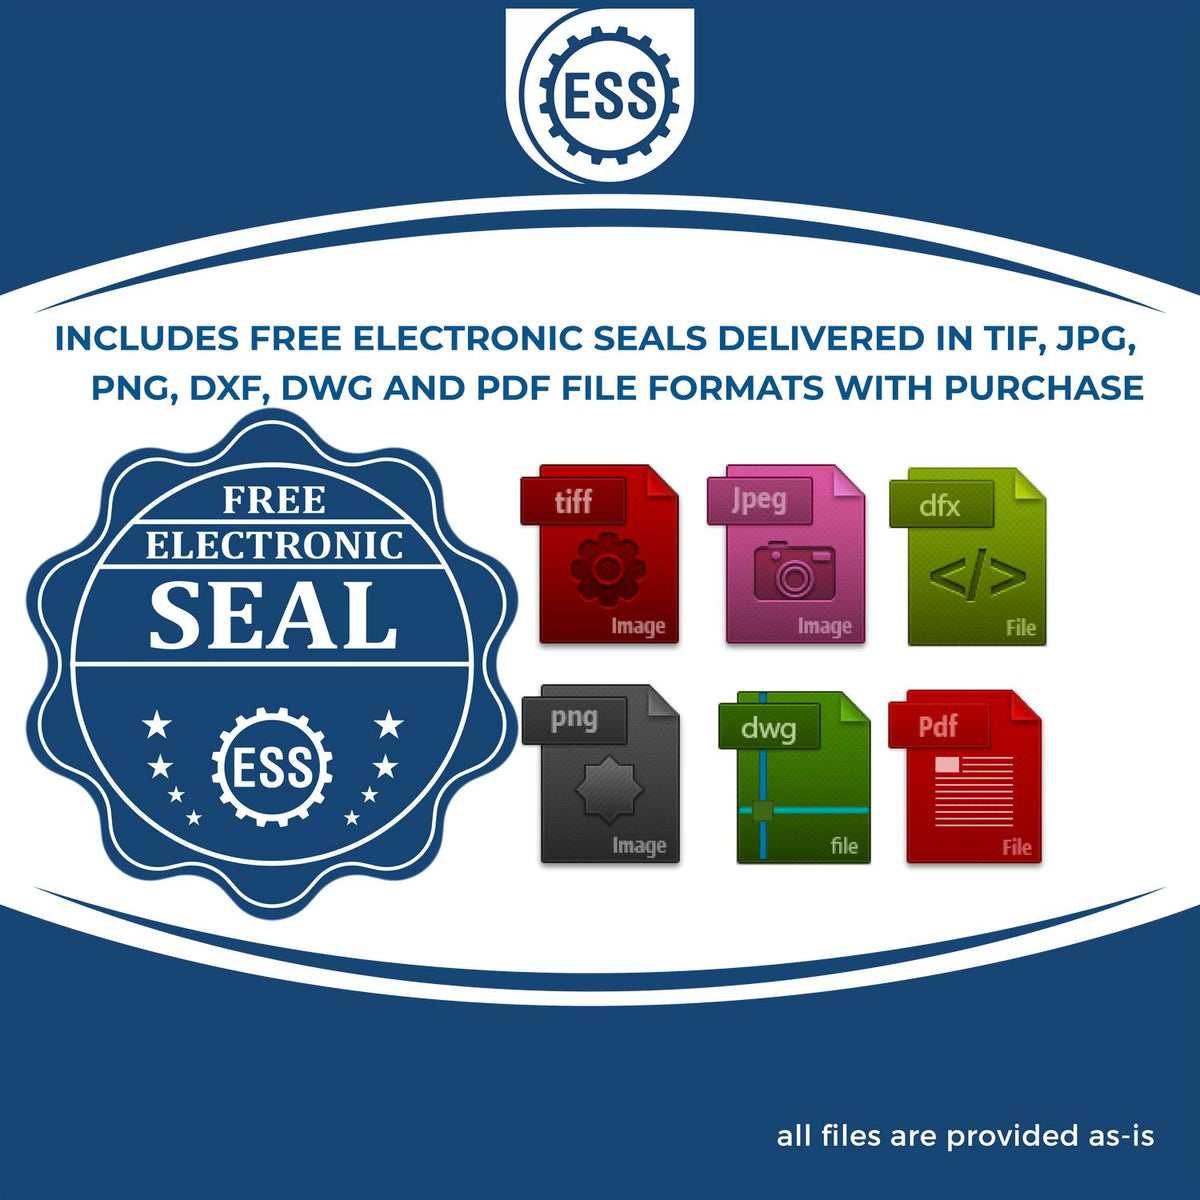 An infographic for the free electronic seal for the Self-Inking Alabama Landscape Architect Stamp illustrating the different file type icons such as DXF, DWG, TIF, JPG and PNG.